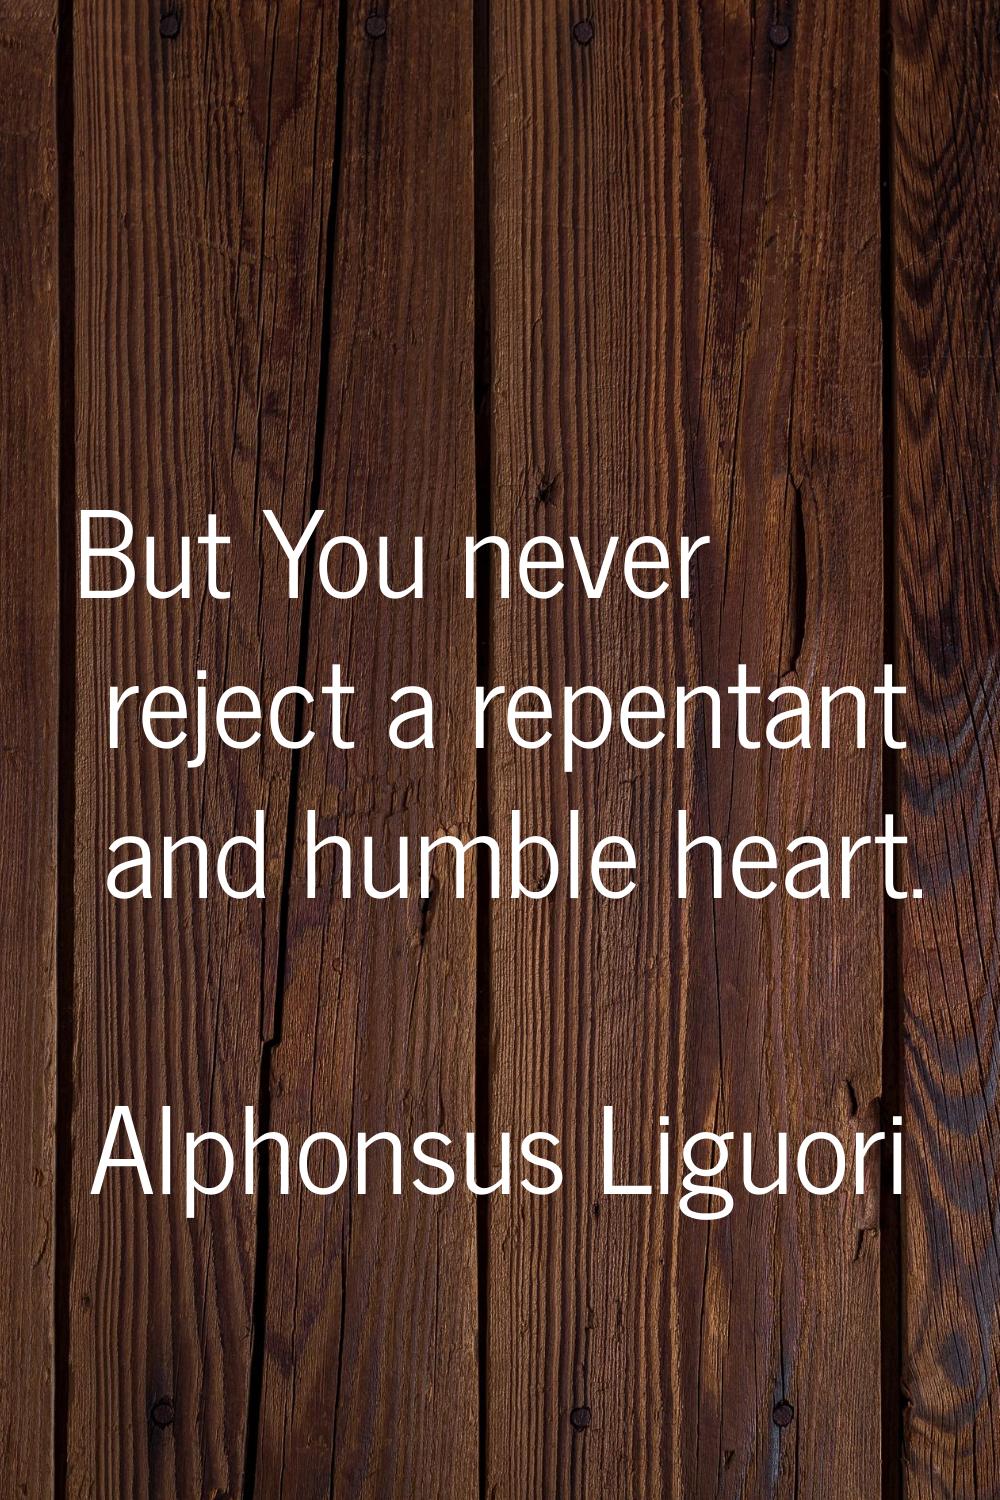 But You never reject a repentant and humble heart.